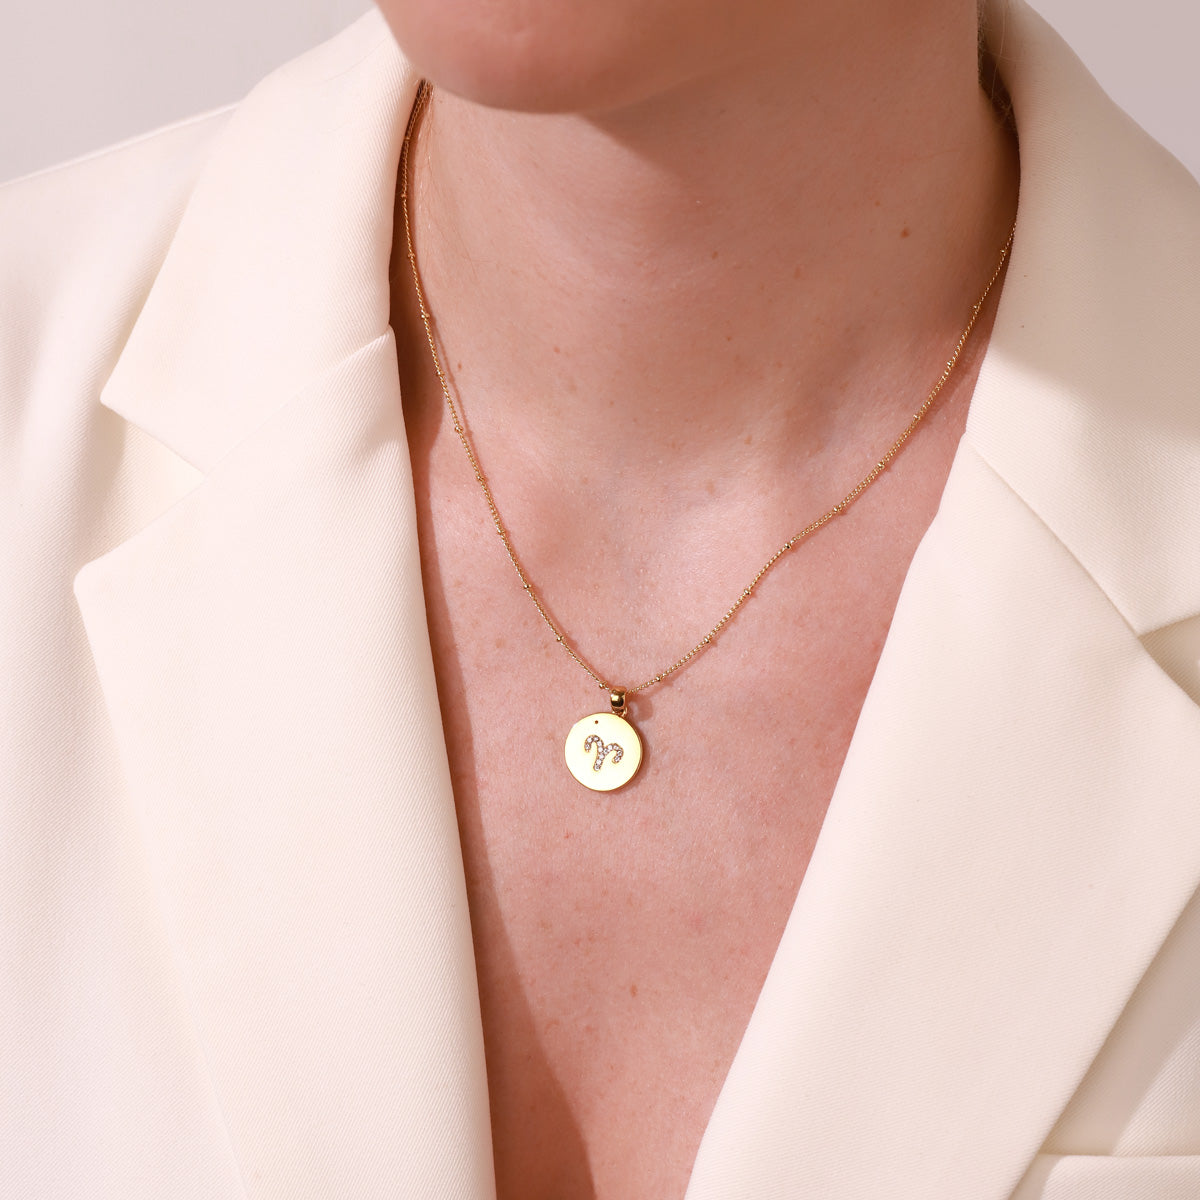 Aries Constellation Gold Coin Pendant Necklace